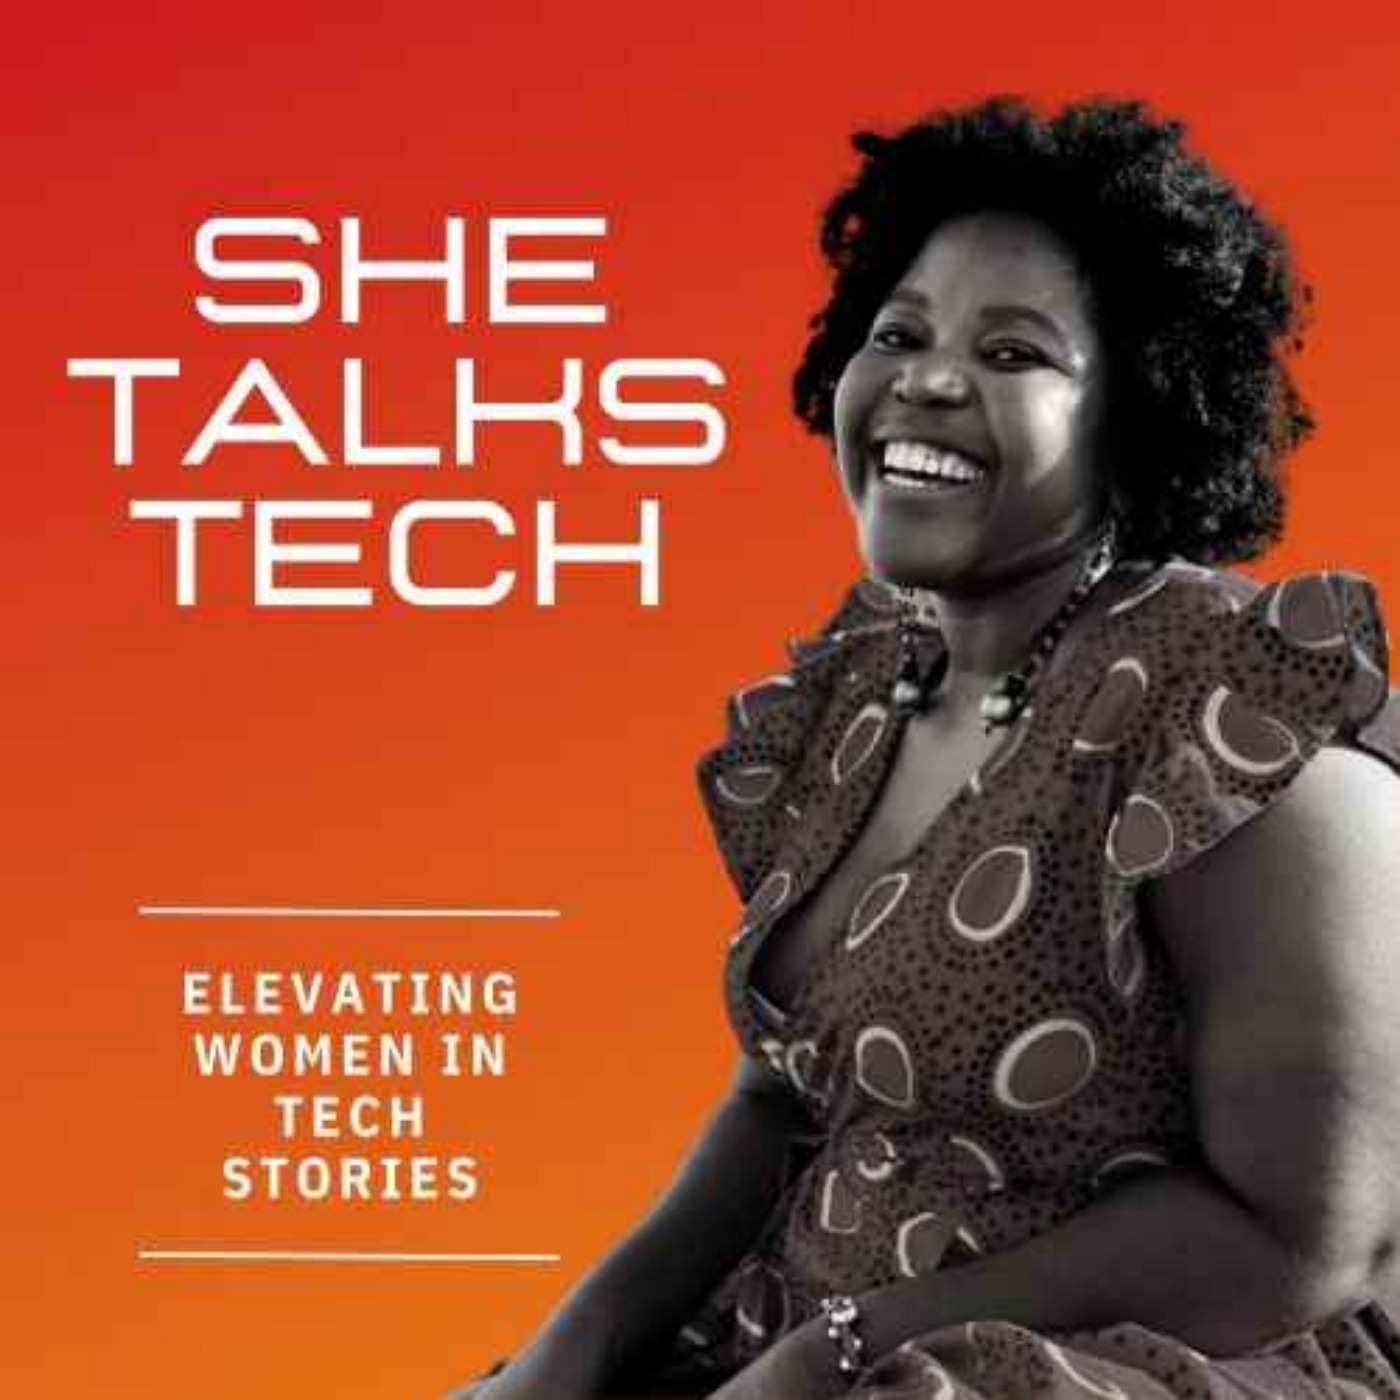 23 -  On being in the Frontline of Tech Advocacy and her Trailblazing Path - Keitumetsi Tsotetsi